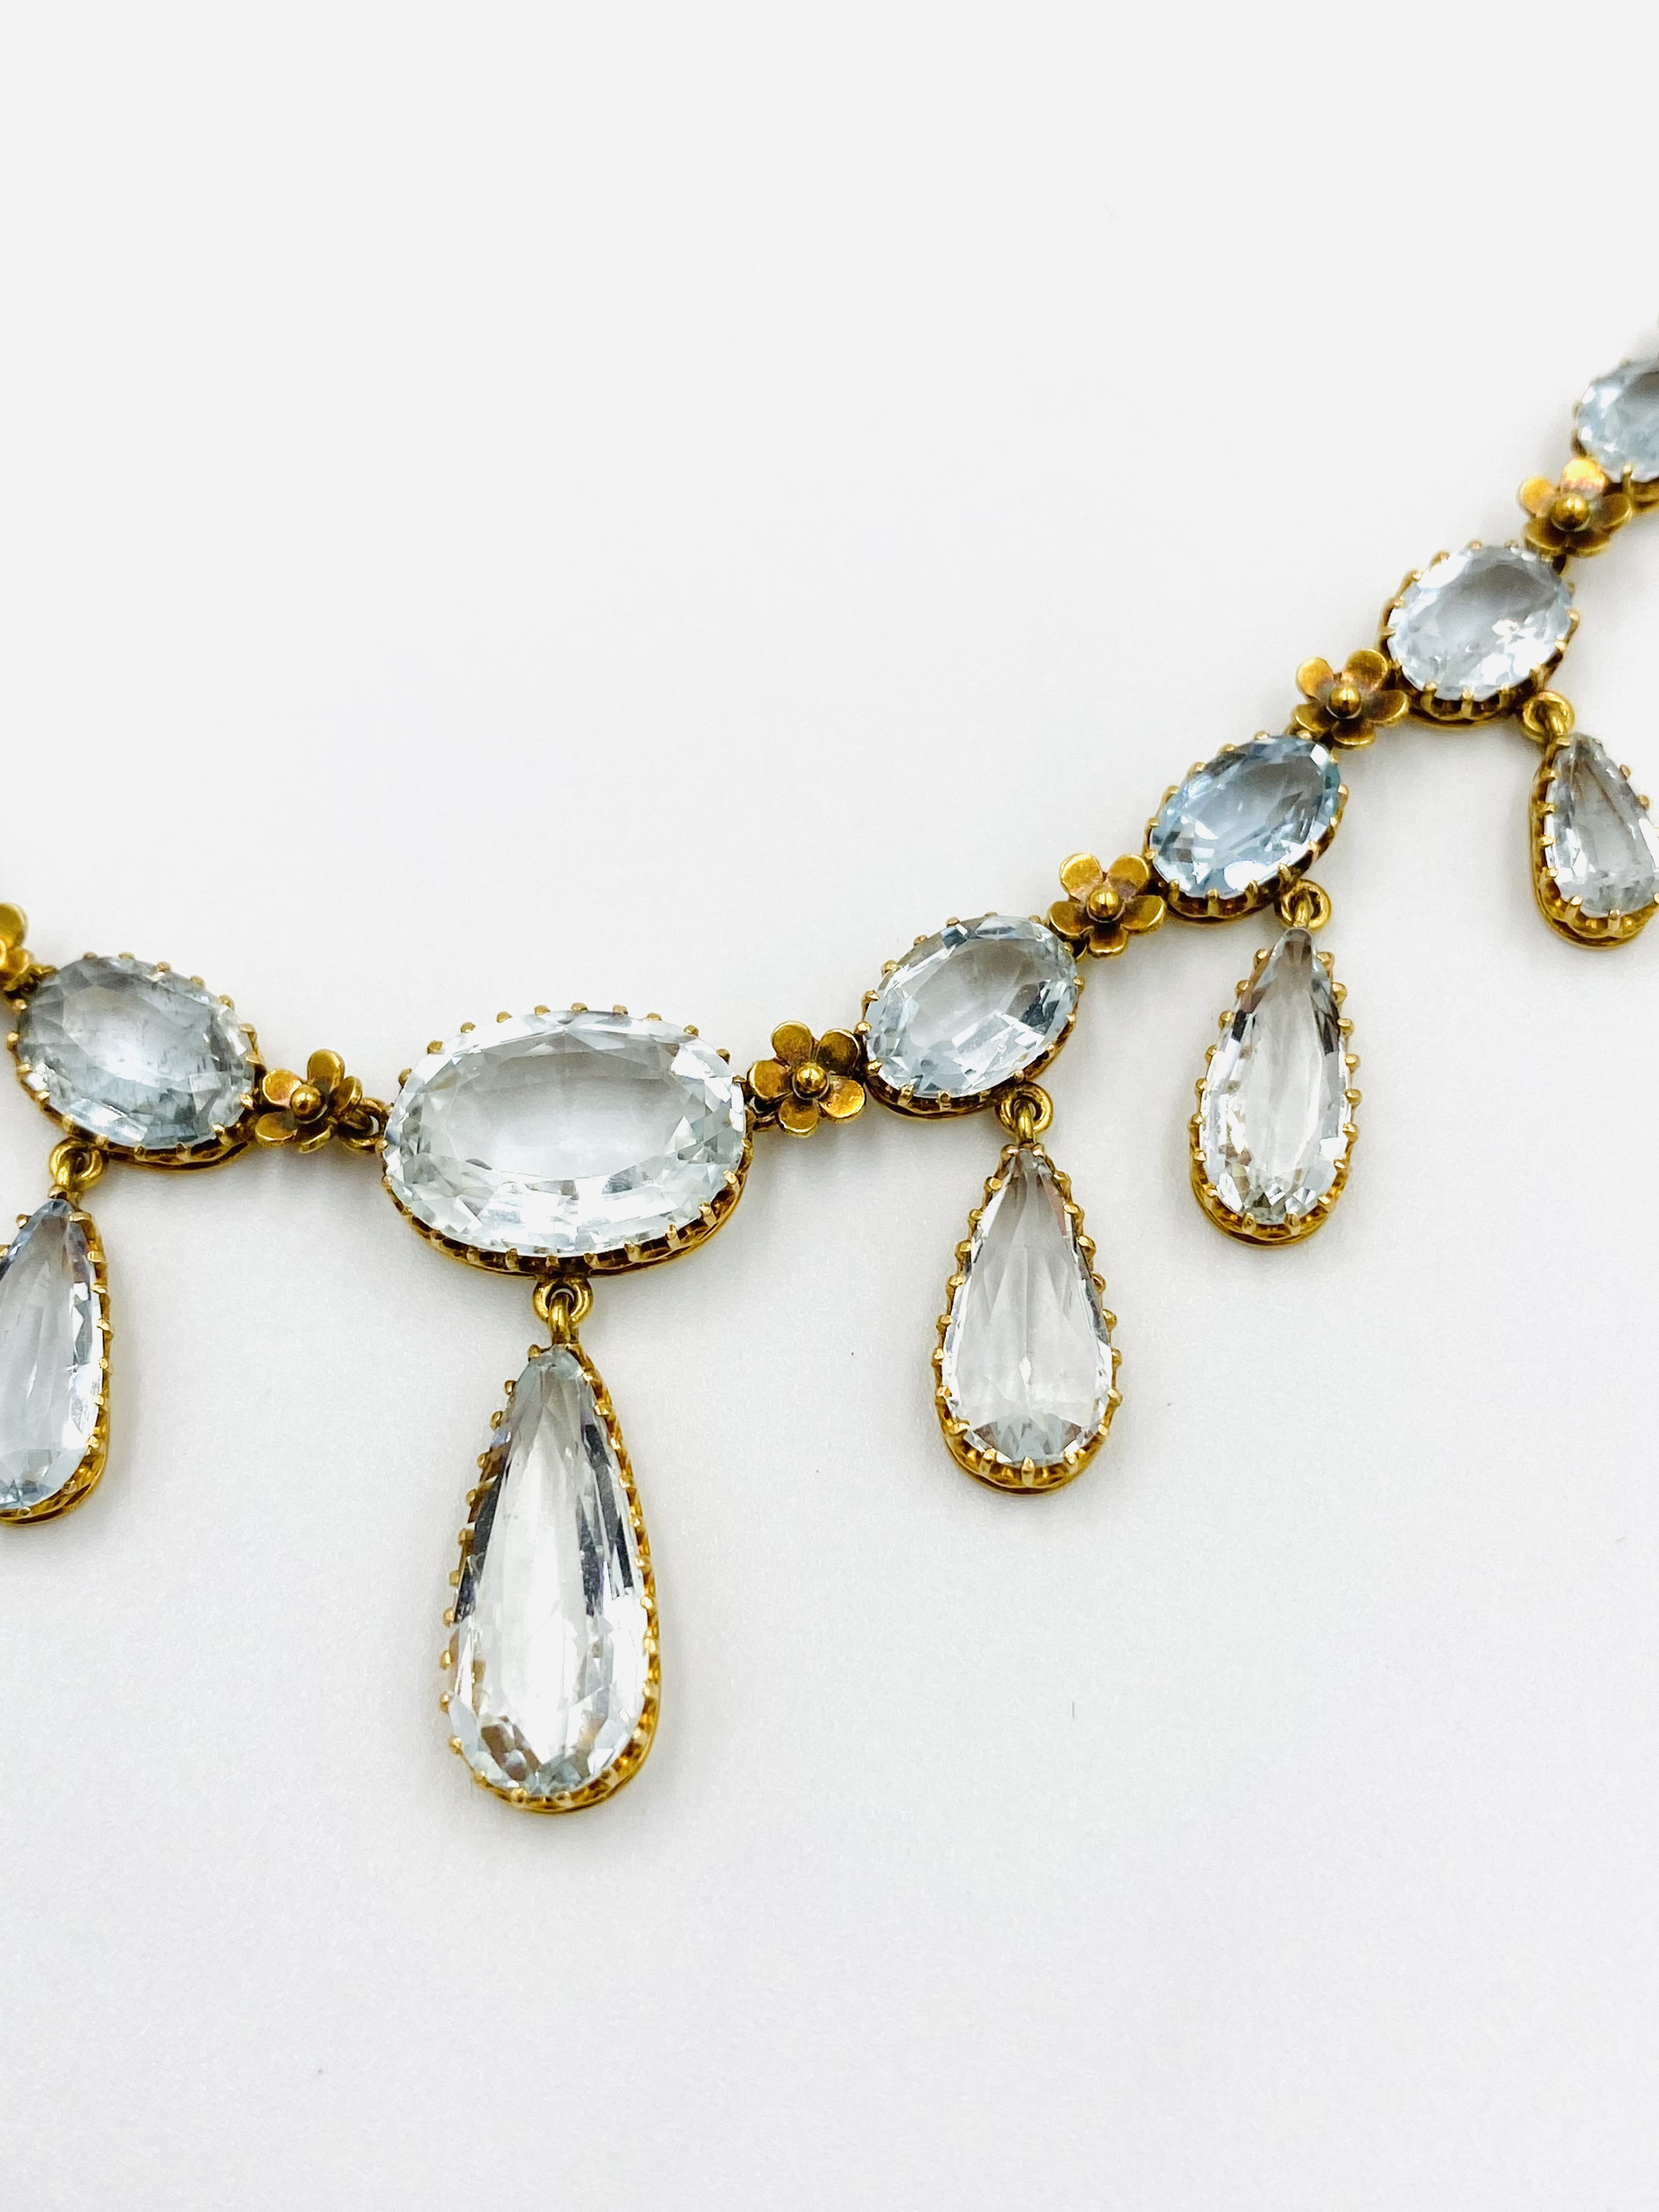 18ct gold and aquamarine necklace by Mrs. Newman - Image 3 of 6